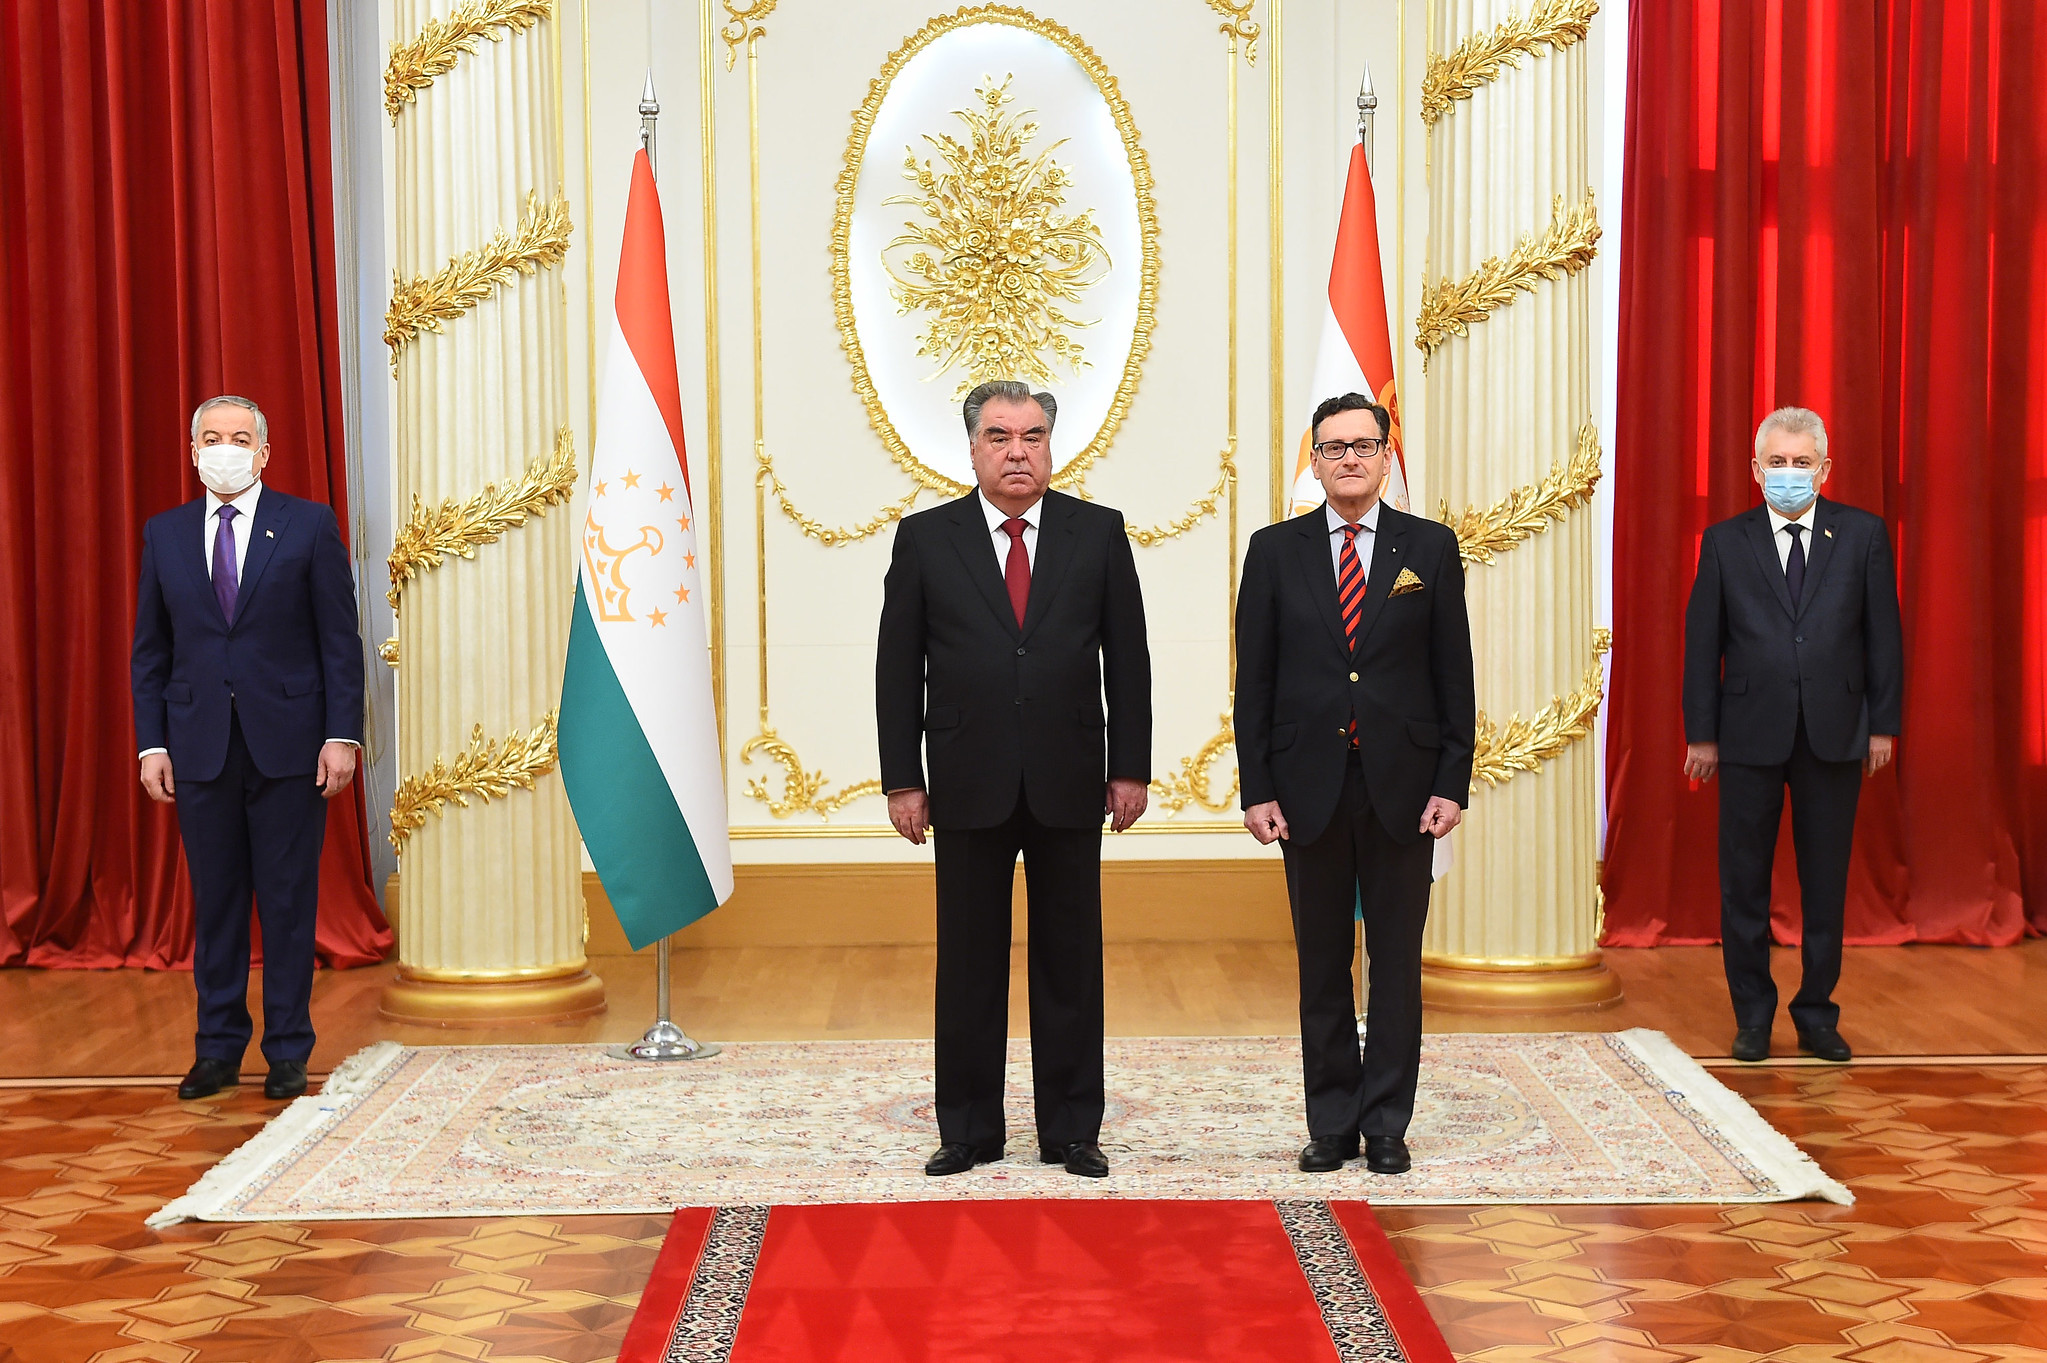 The Ambassador of the Sovereign Order of Malta to the Tajikistan presents his letters of credence